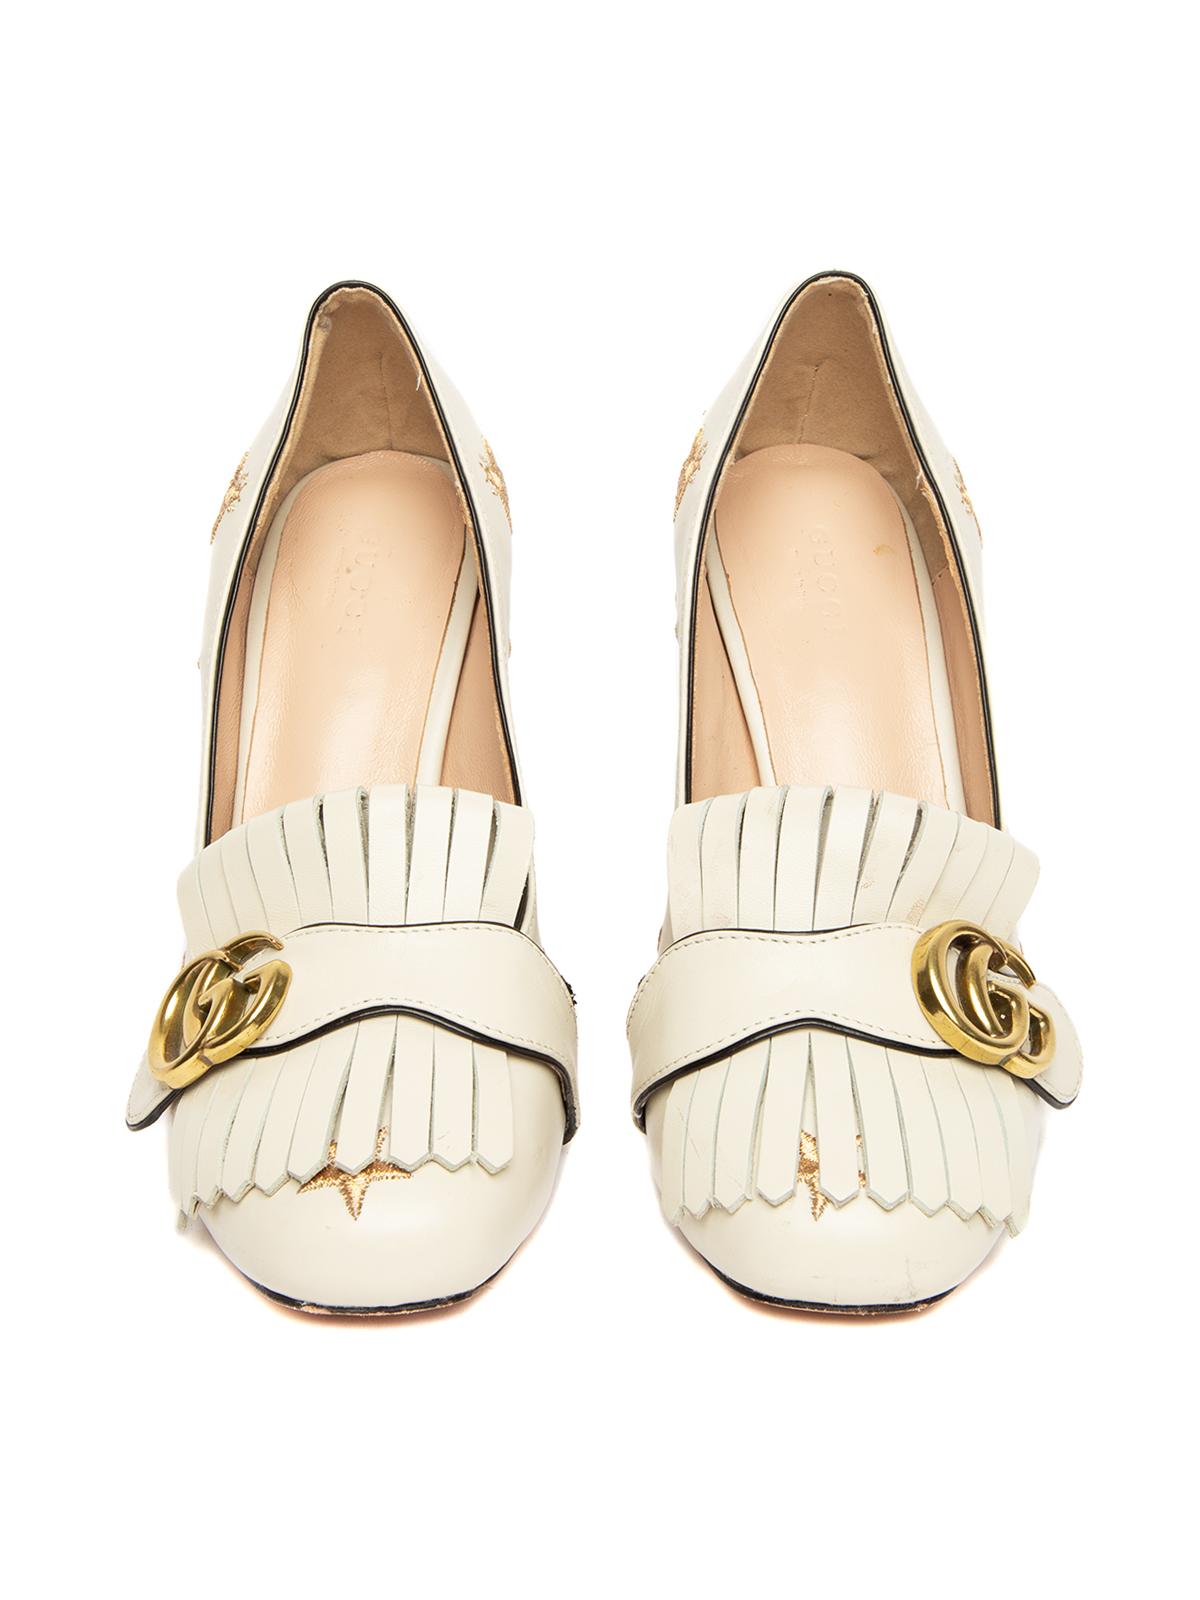 White Pre-Loved Gucci Women's Bee and Star Marmont Heels